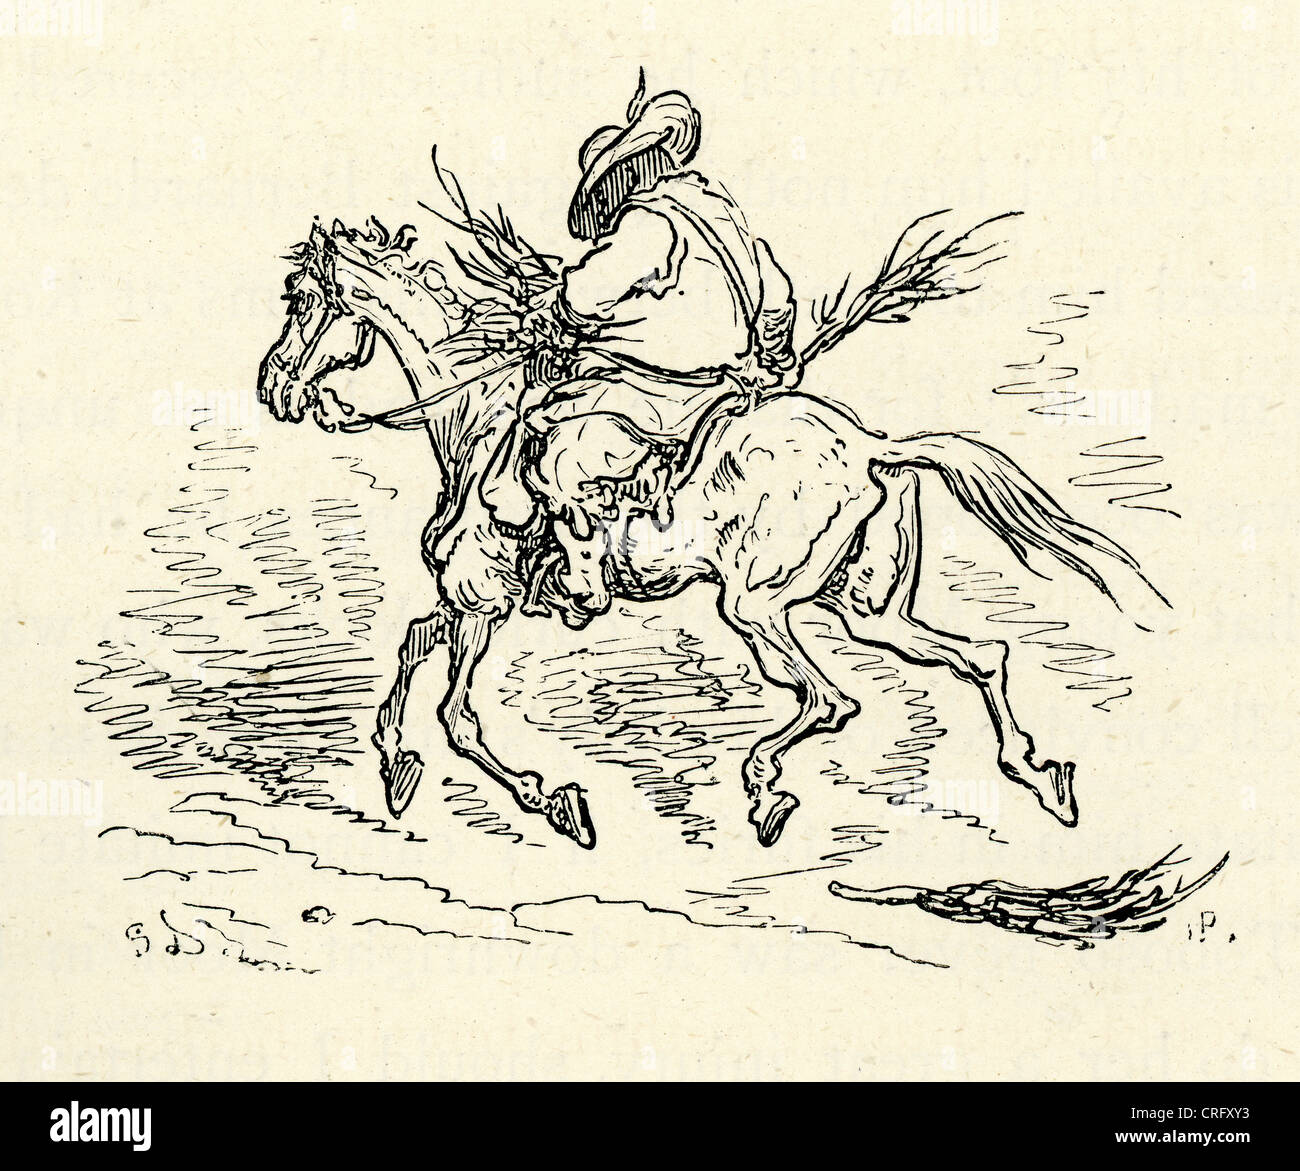 Sancho Panza riding. Illustration by Gustave Dore from Don Quixote. Stock Photo